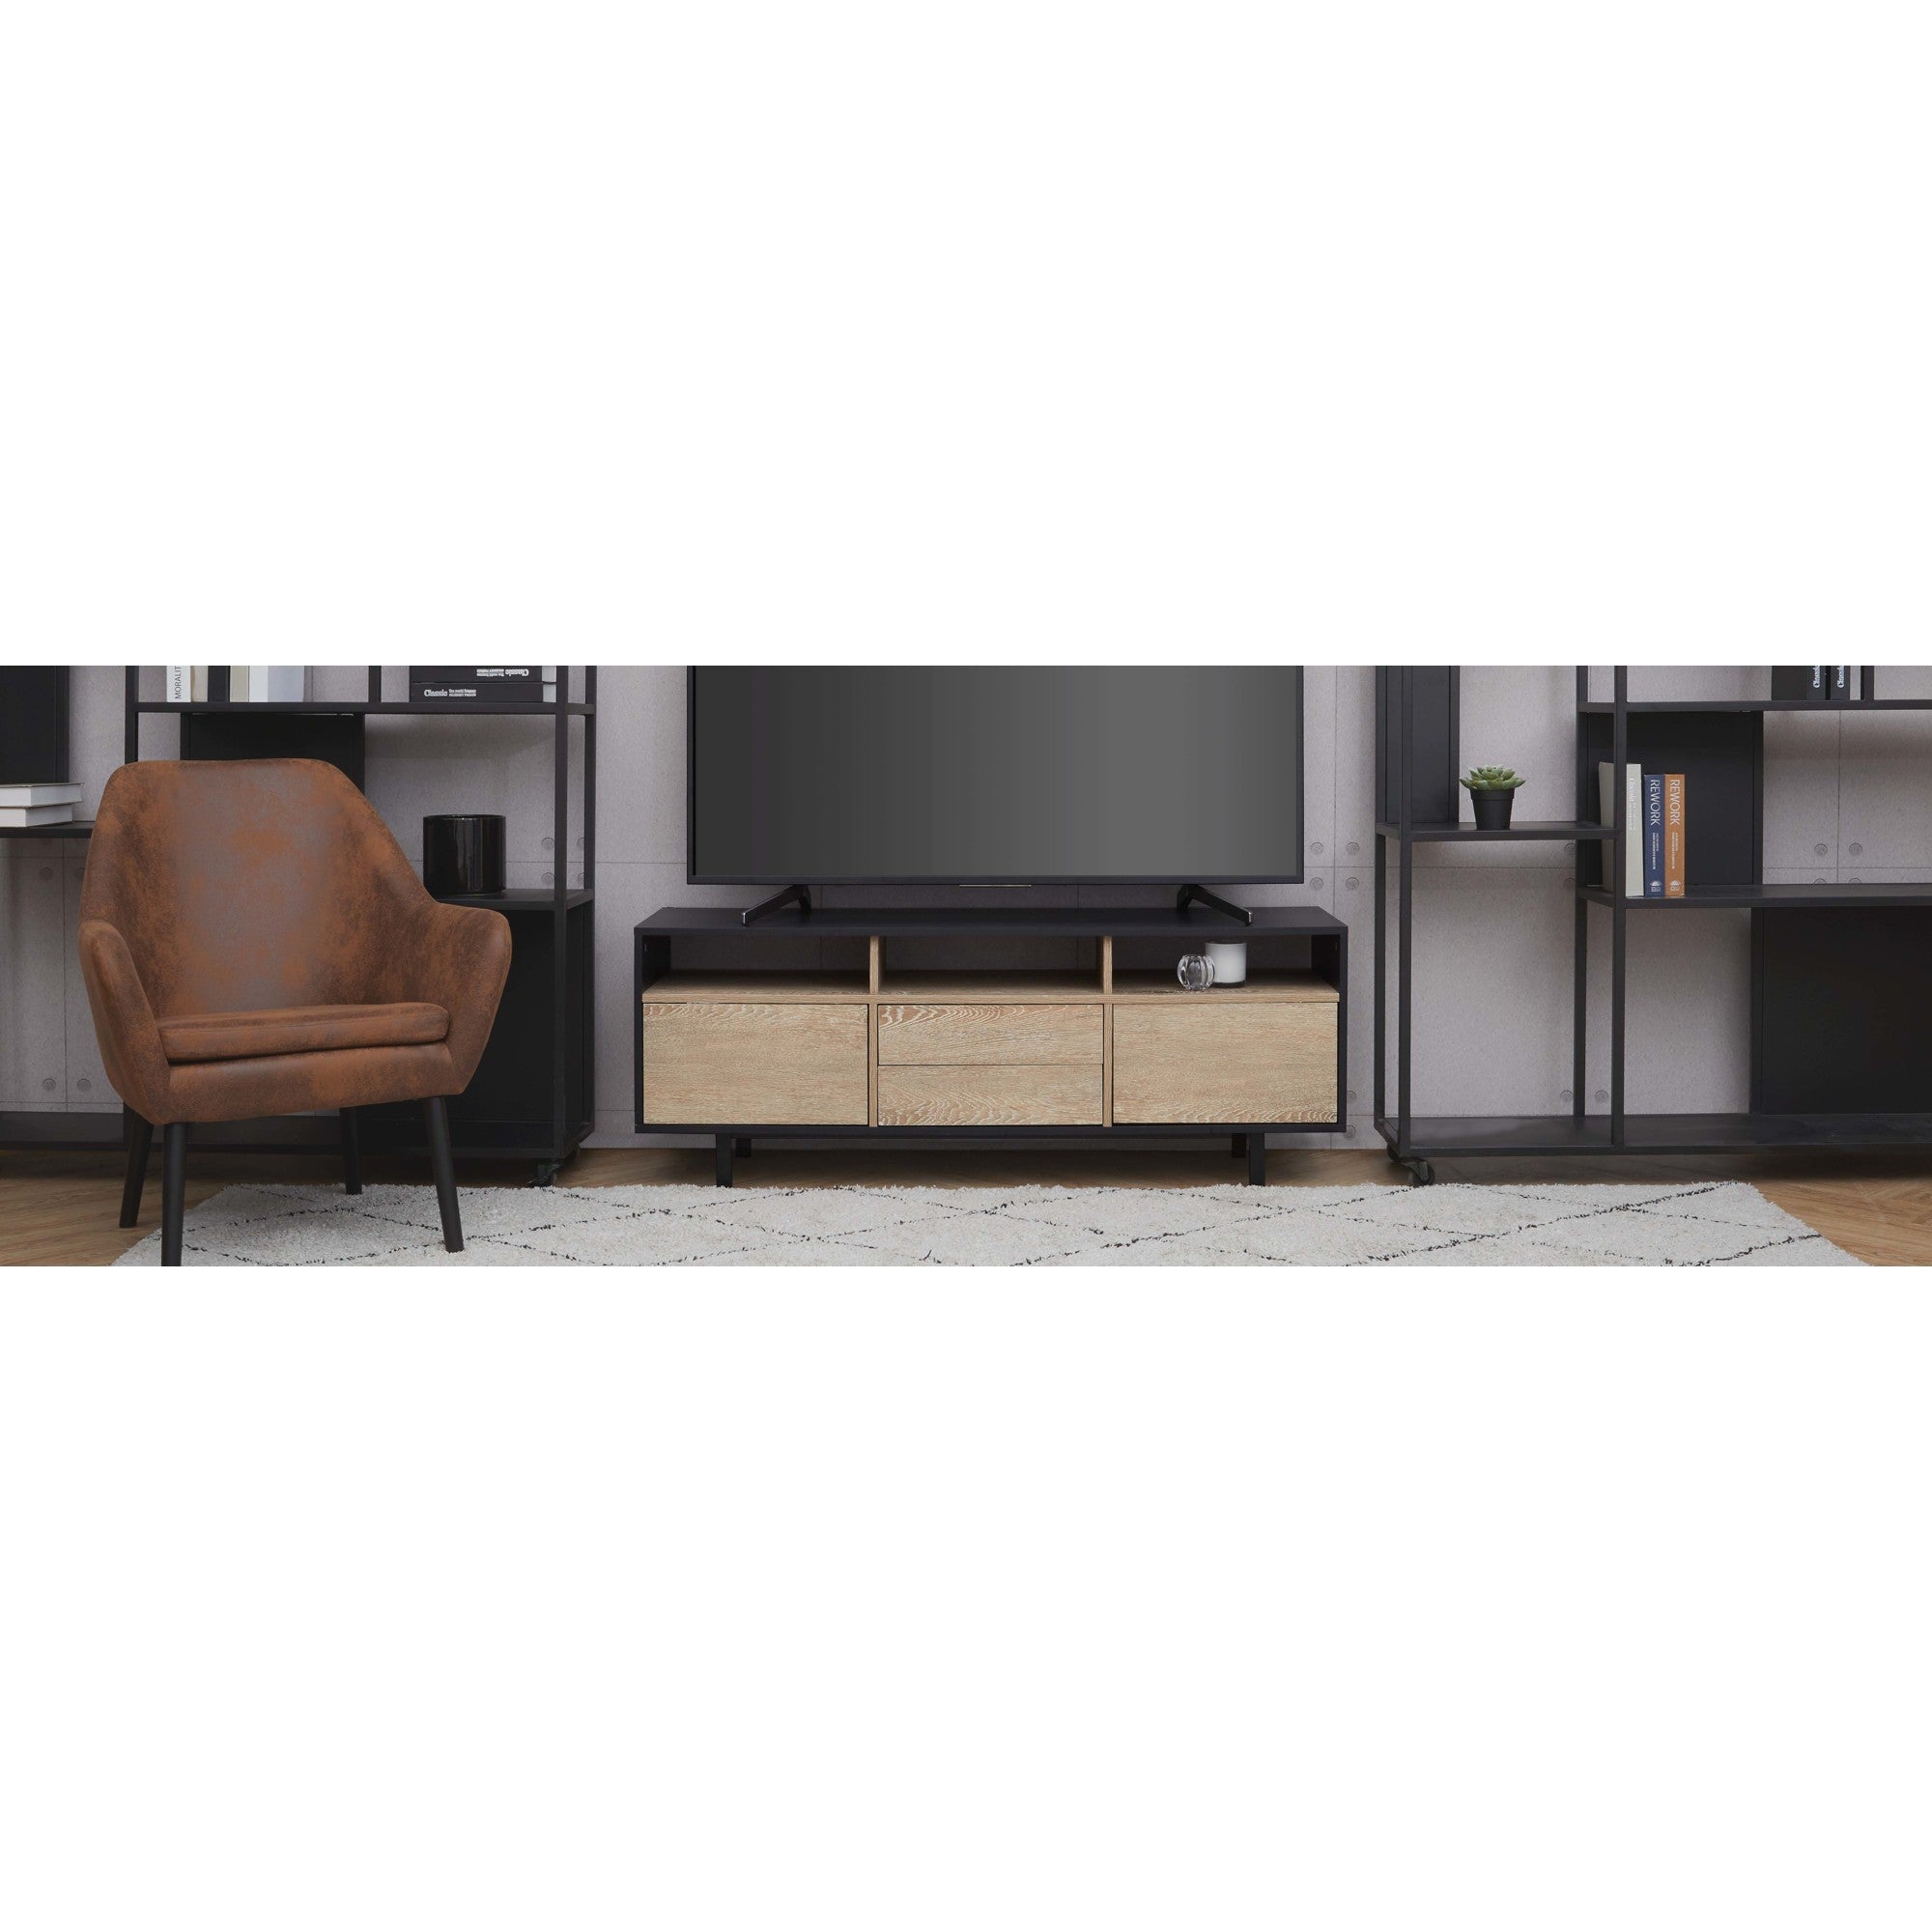 Teamson Home Bryson TV Stand for Flat Screen TVs up to 65” with 2 Doors, 3 Open Shelves, & 2 Drawer Storage, Black/Rustic Oak